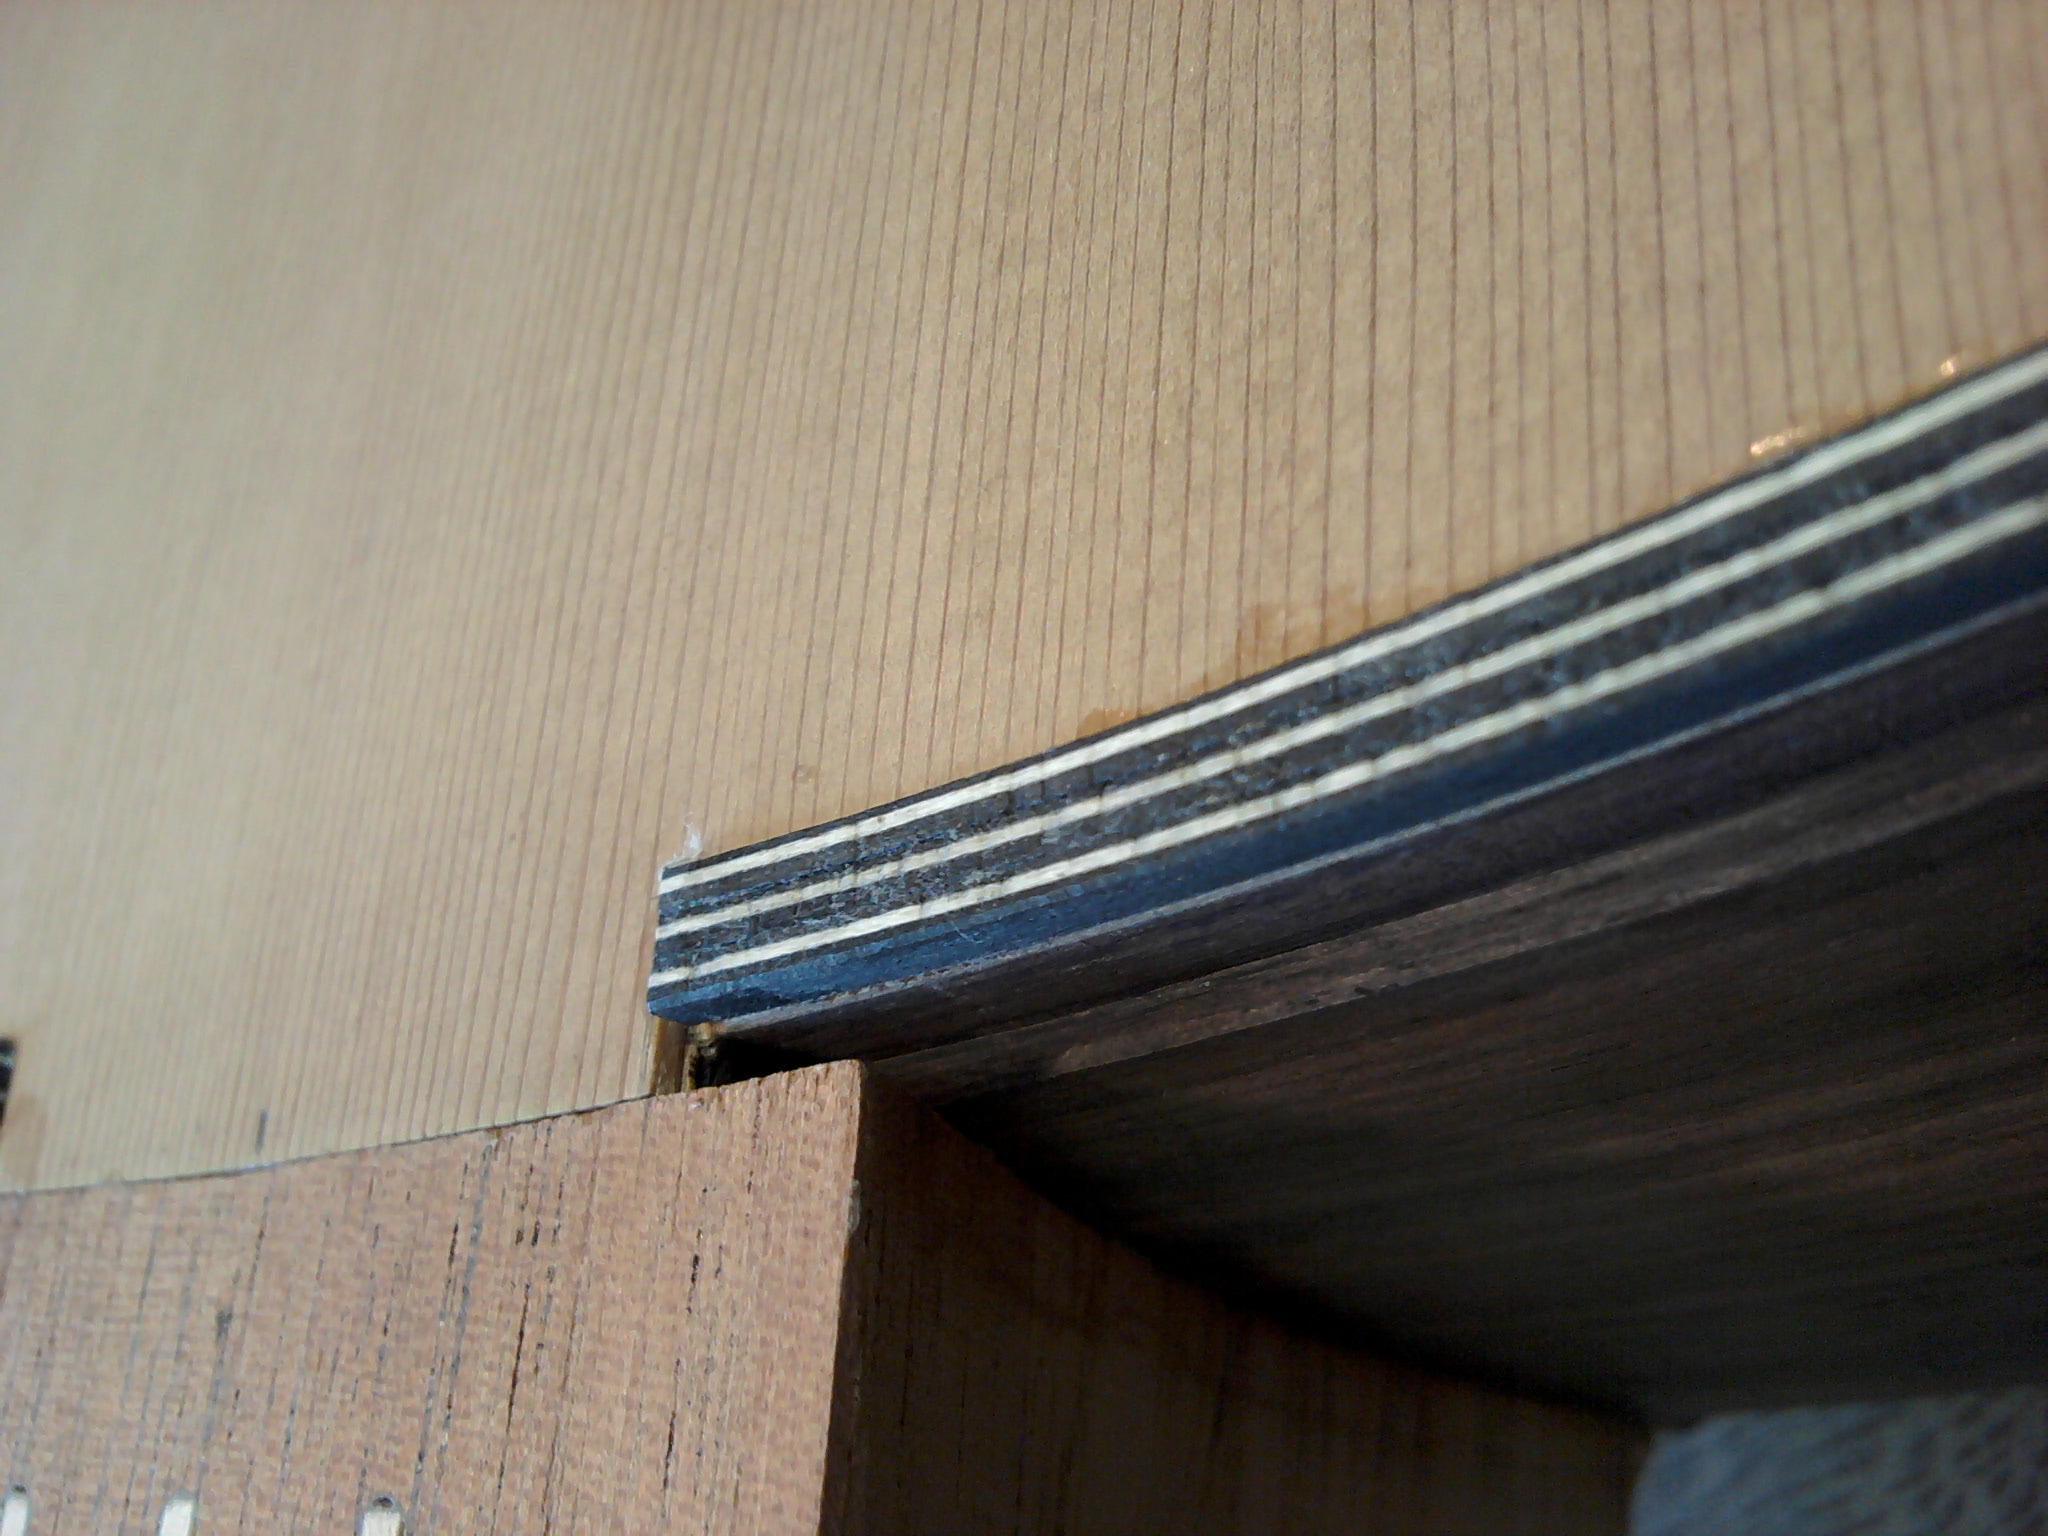 View of the table binding and the groove for the next binding on the side of the ribs.